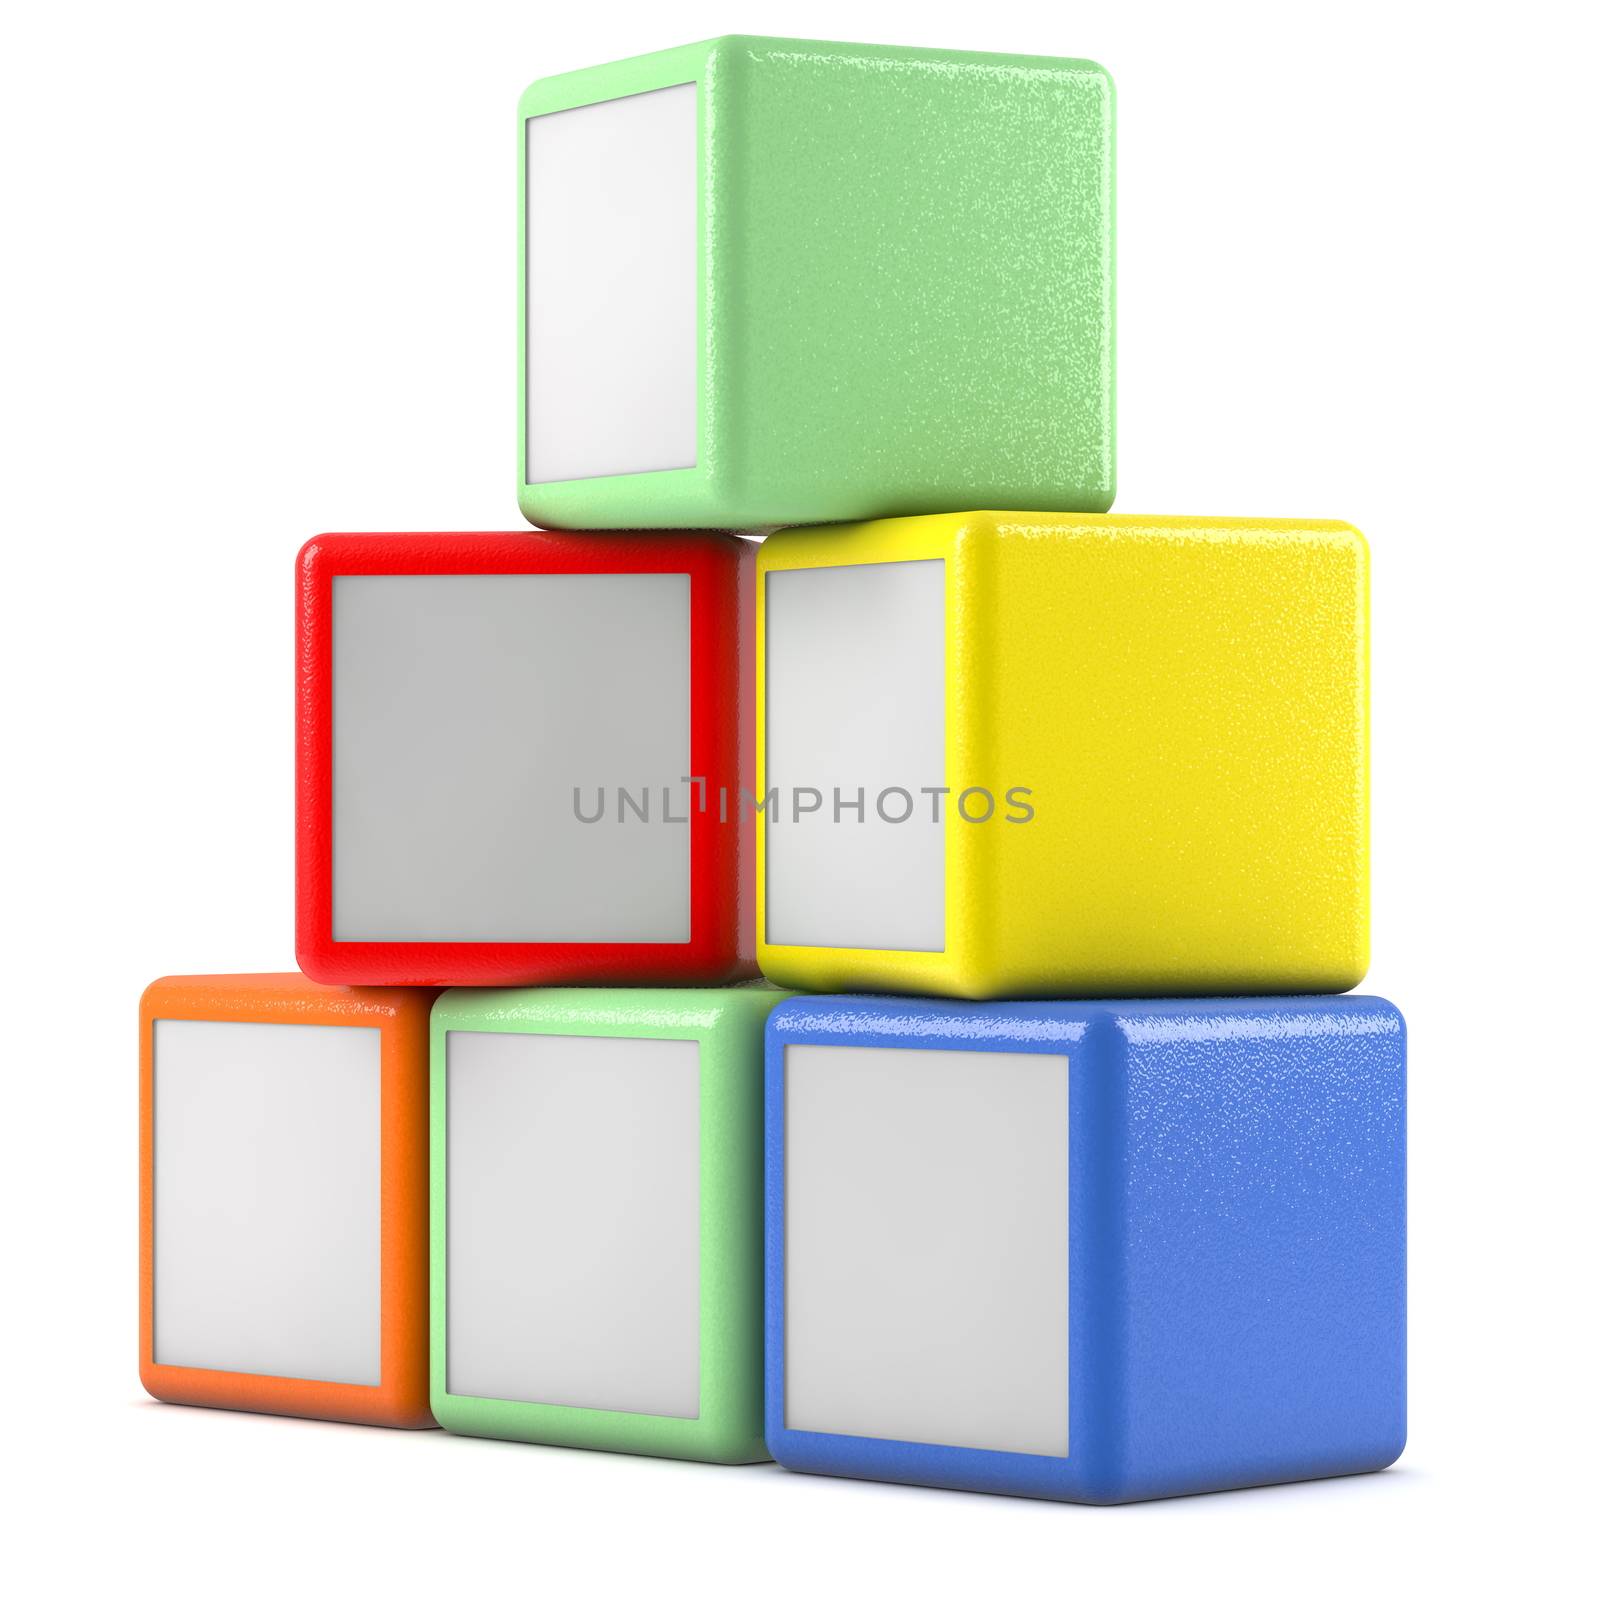 Square boxes on white background
